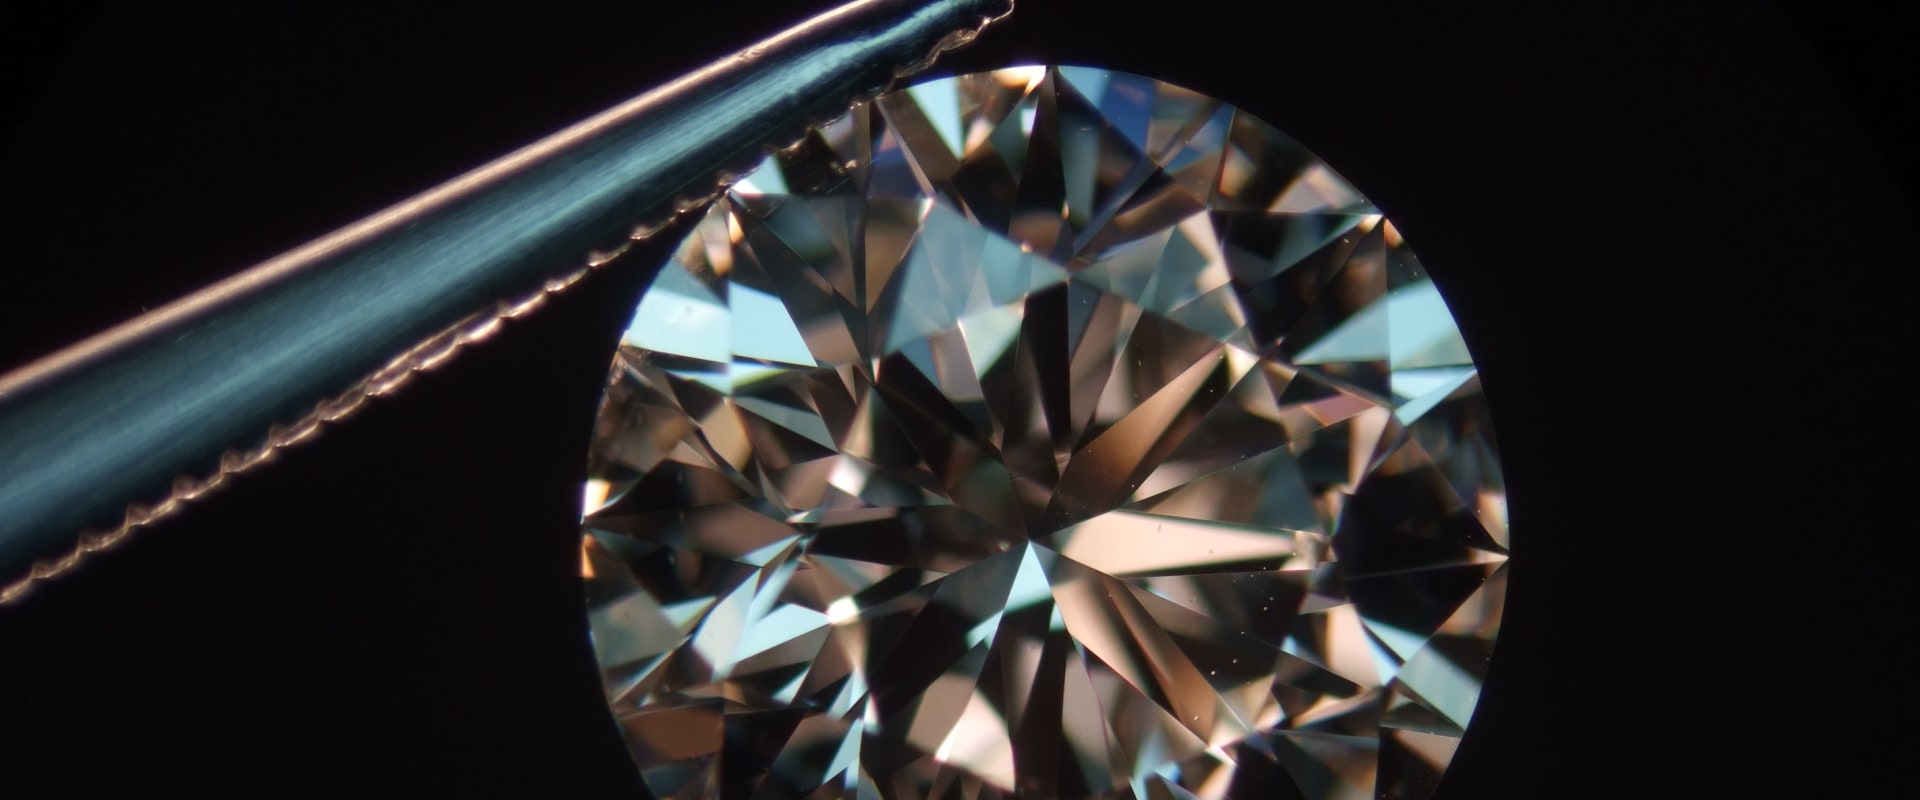 How do you determine if a diamond or sauce has been certified by an independent gemologist?